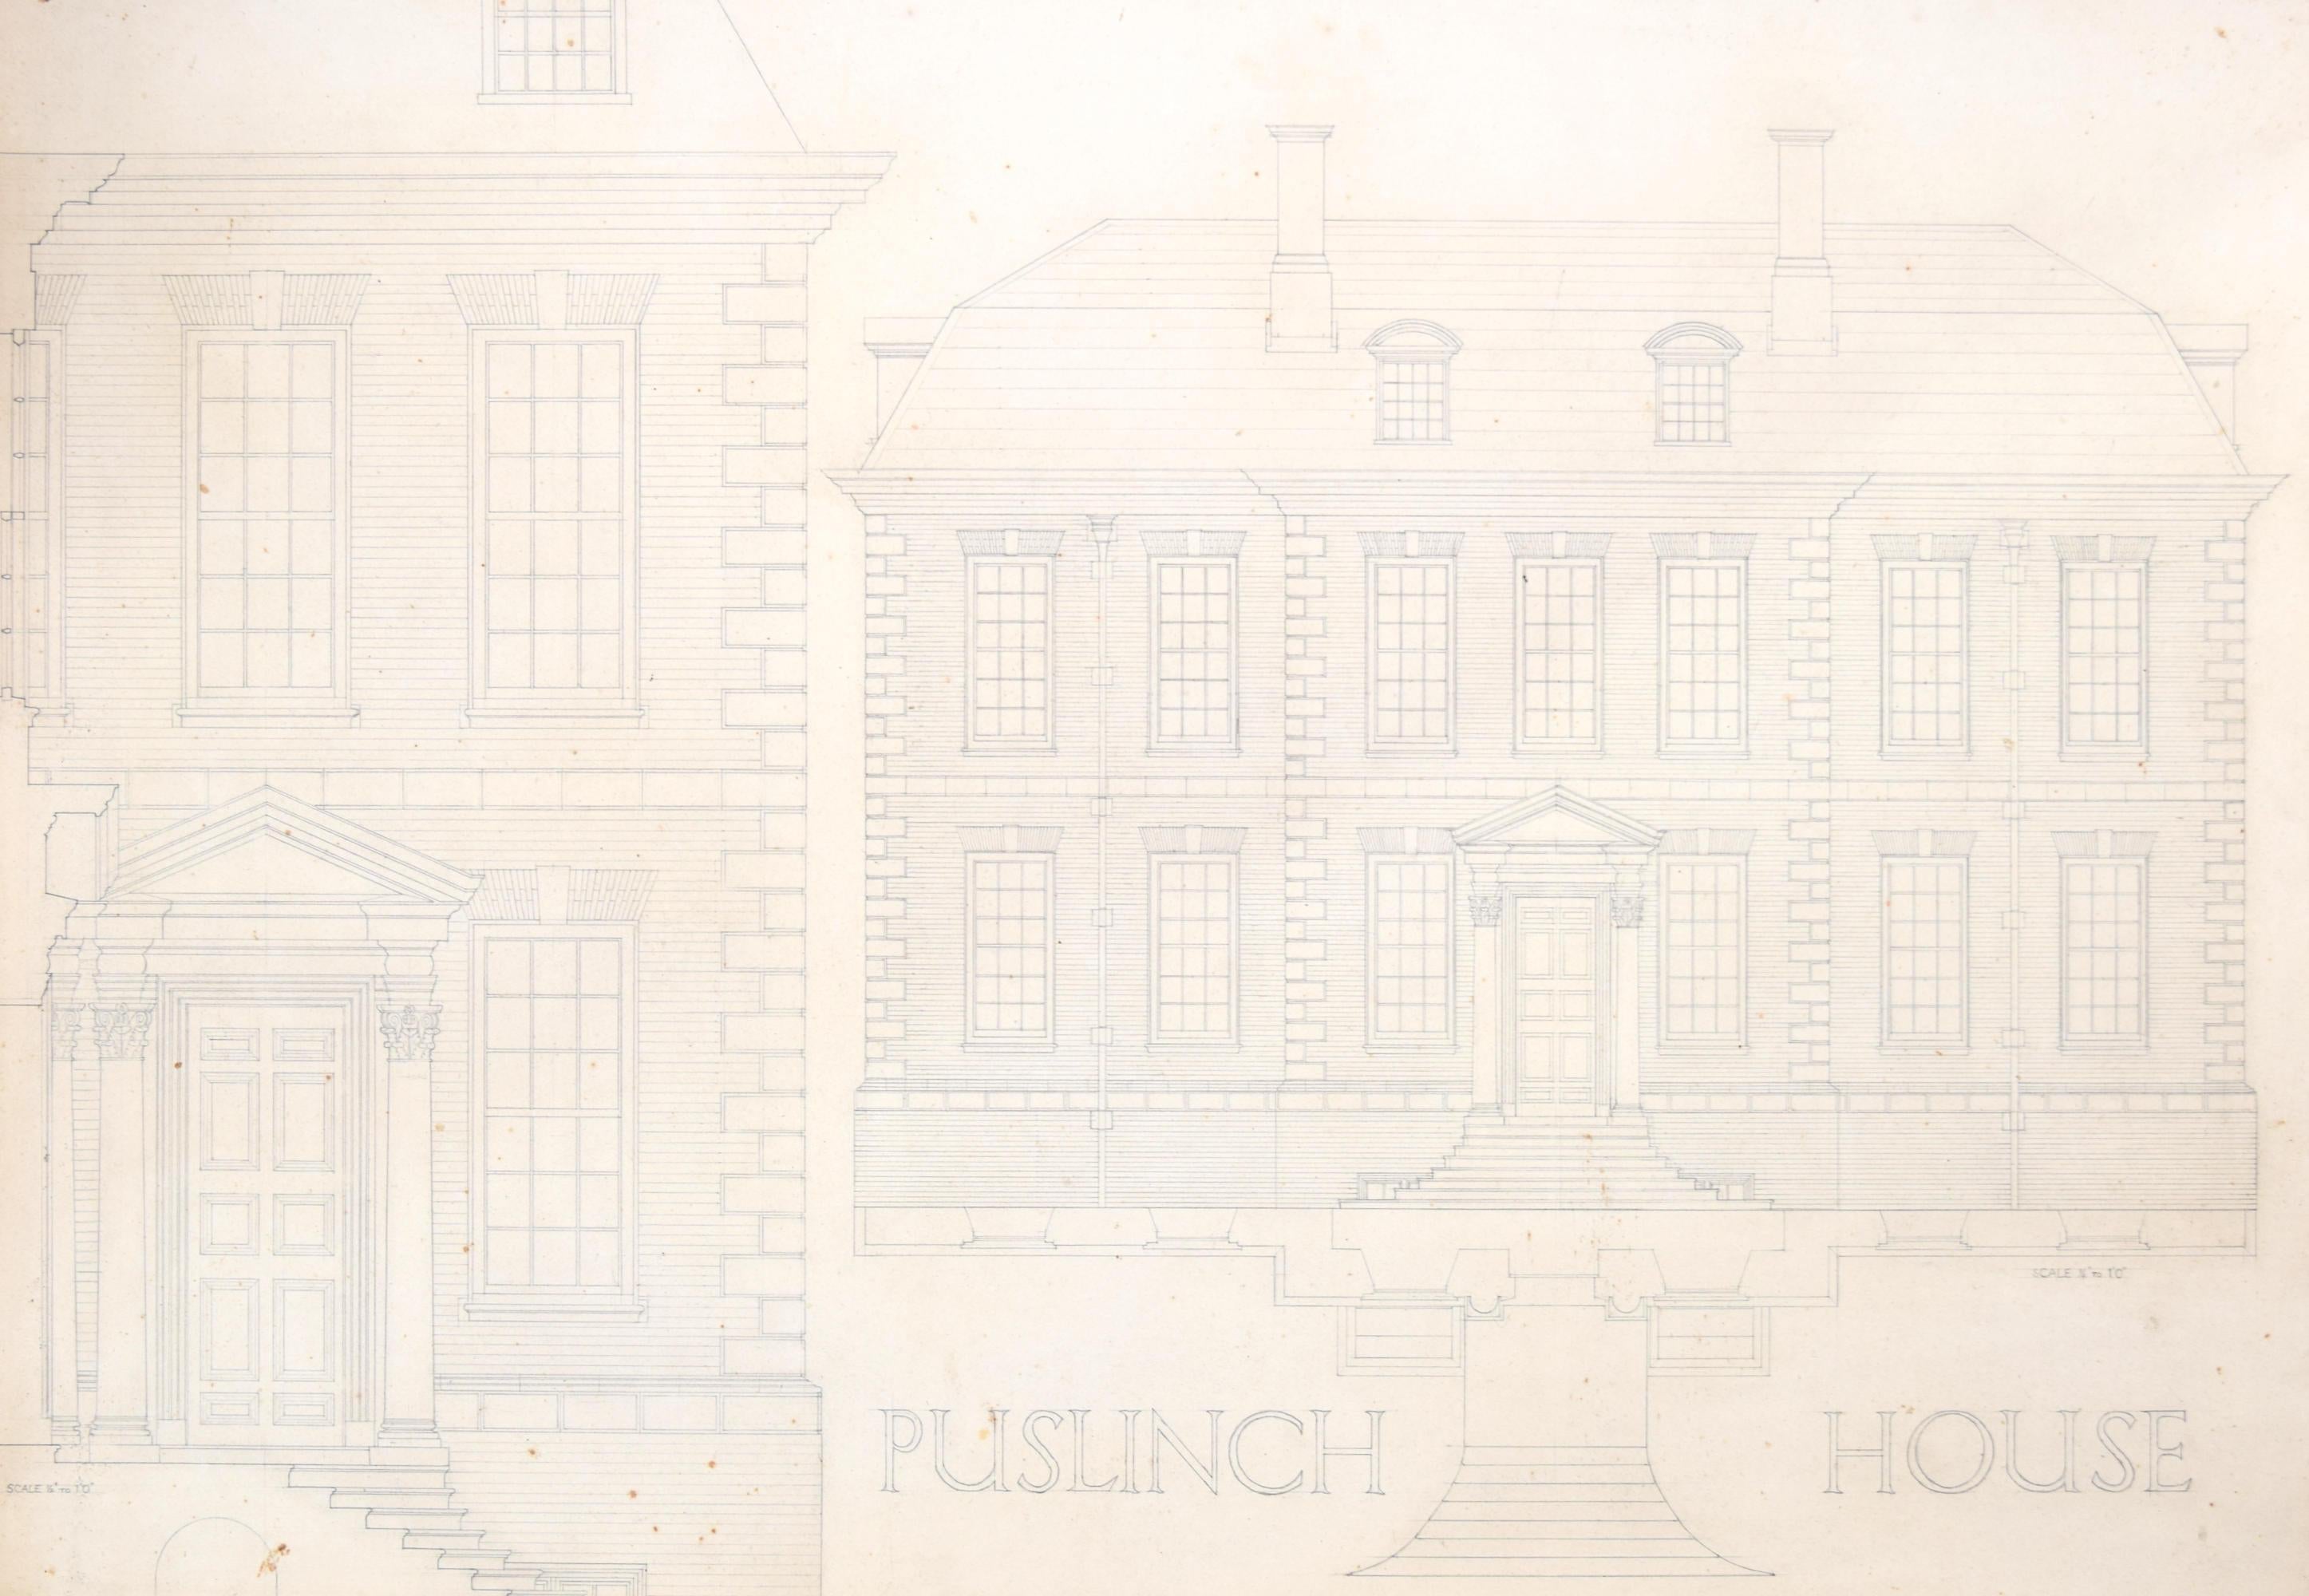 Puslinch House, Devon architectural drawing by S Clapham